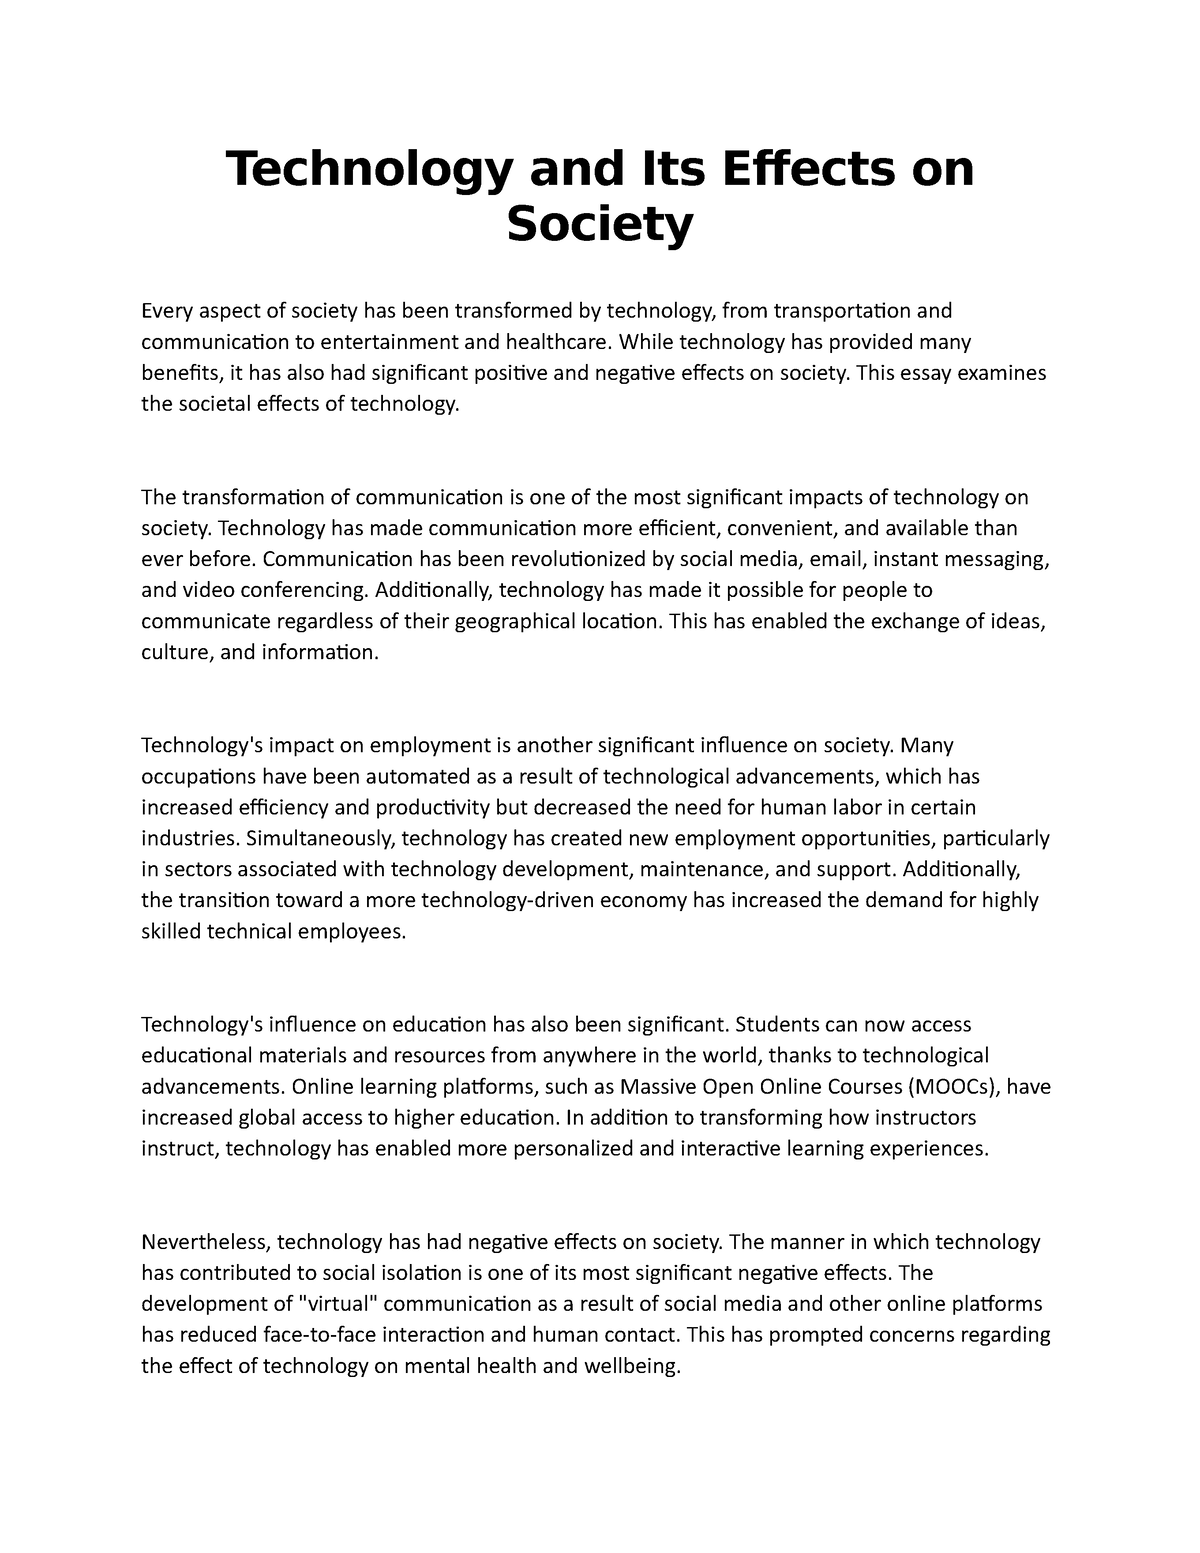 negative effects of technology on society essay